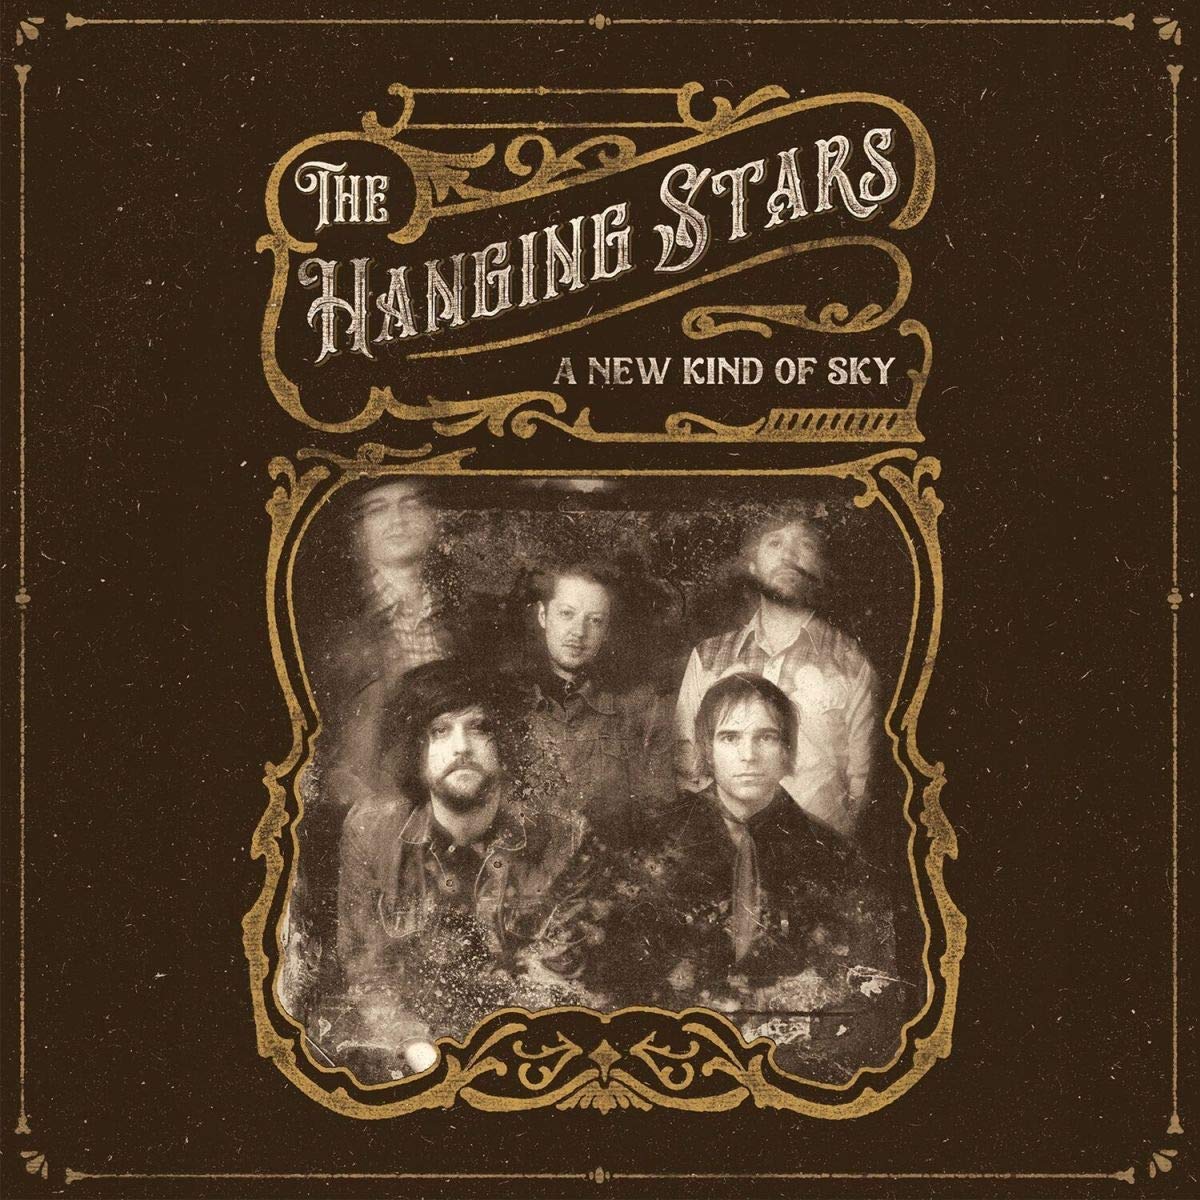 The Hanging Stars – A New Kind Of Sky